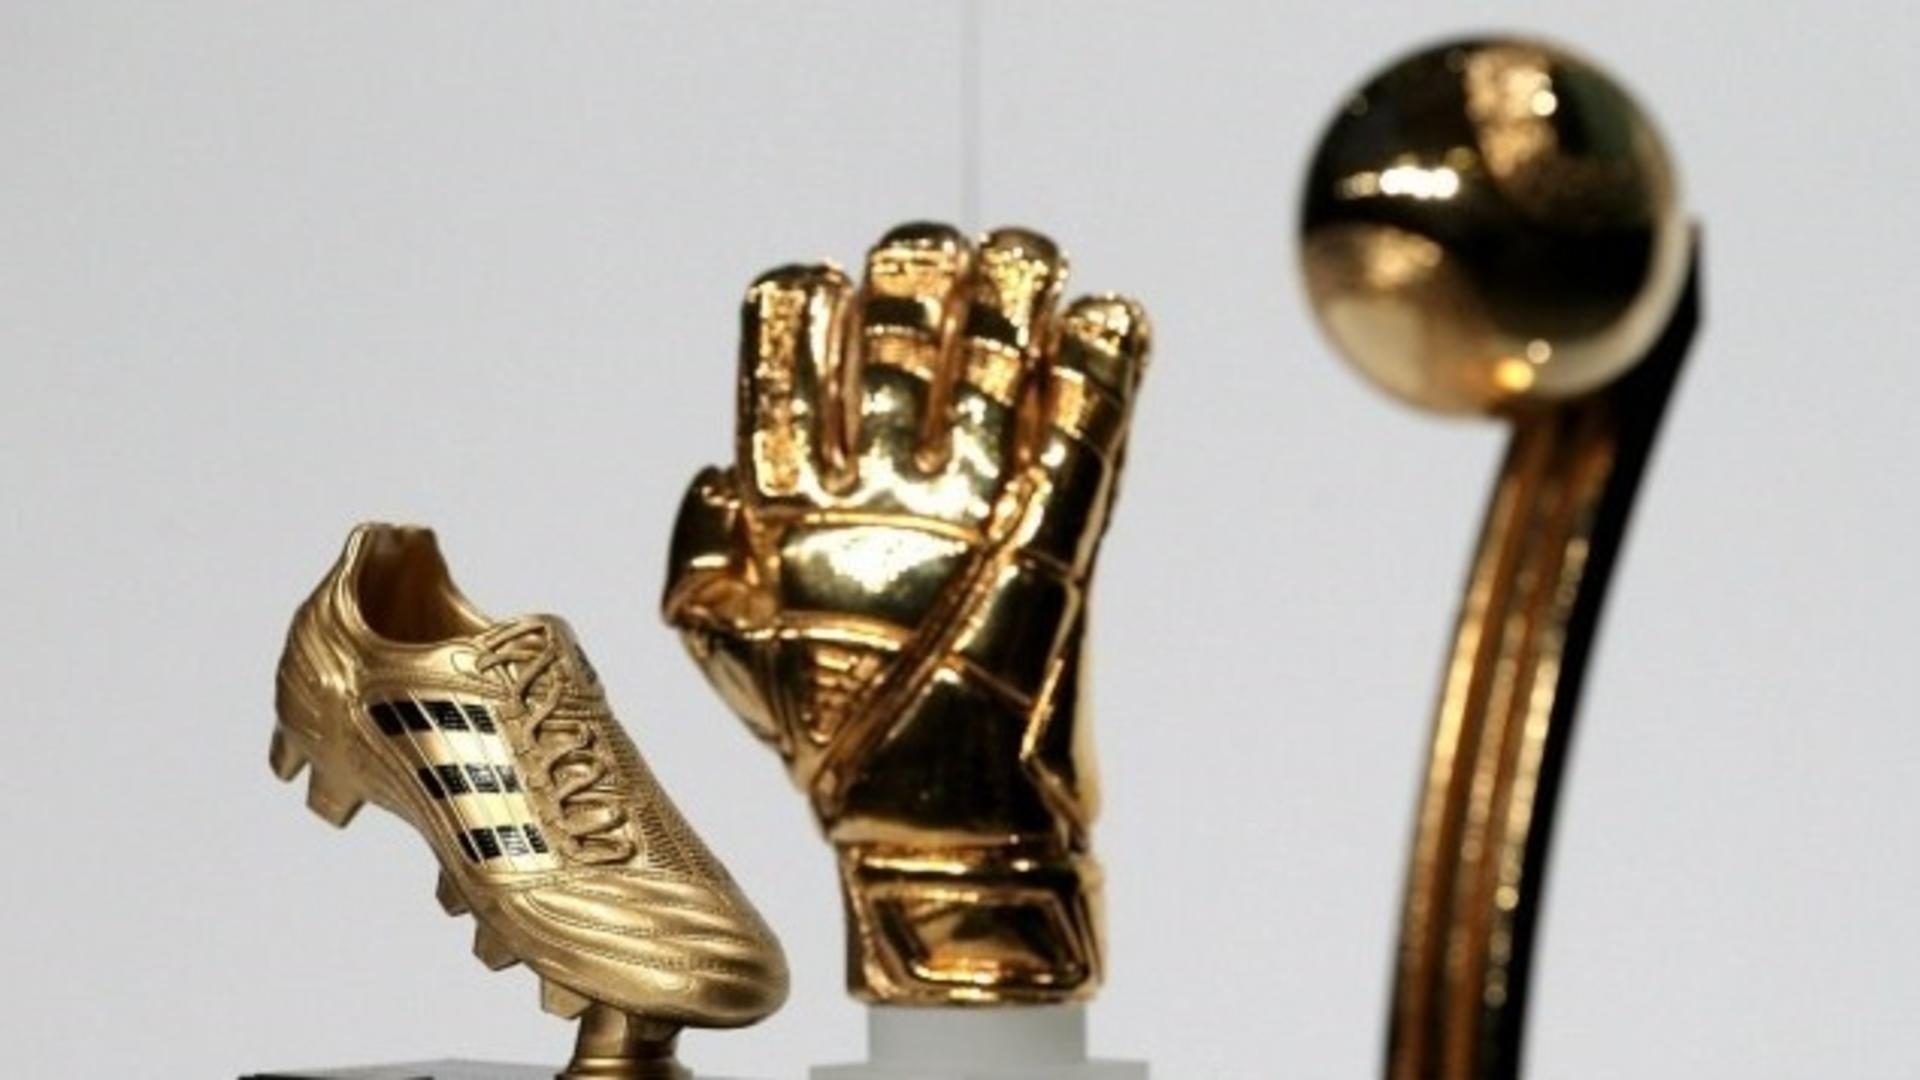 FIFA World Cup Golden Glove winners: Know the best goalkeepers of